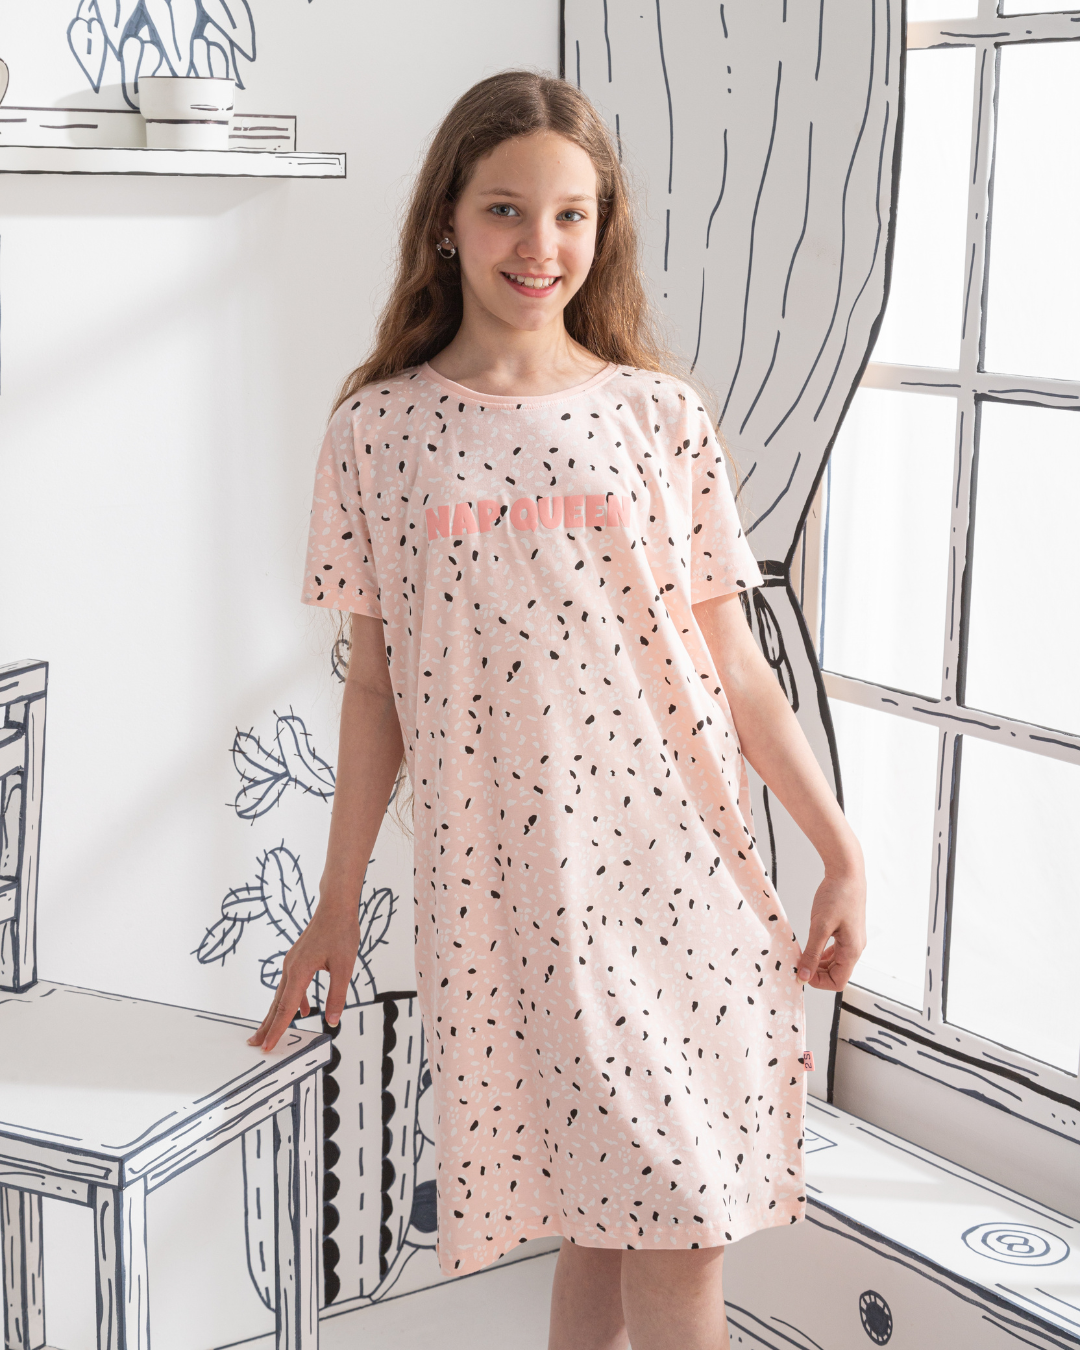 Nap Queen Girls' Printed Cotton Nightgown